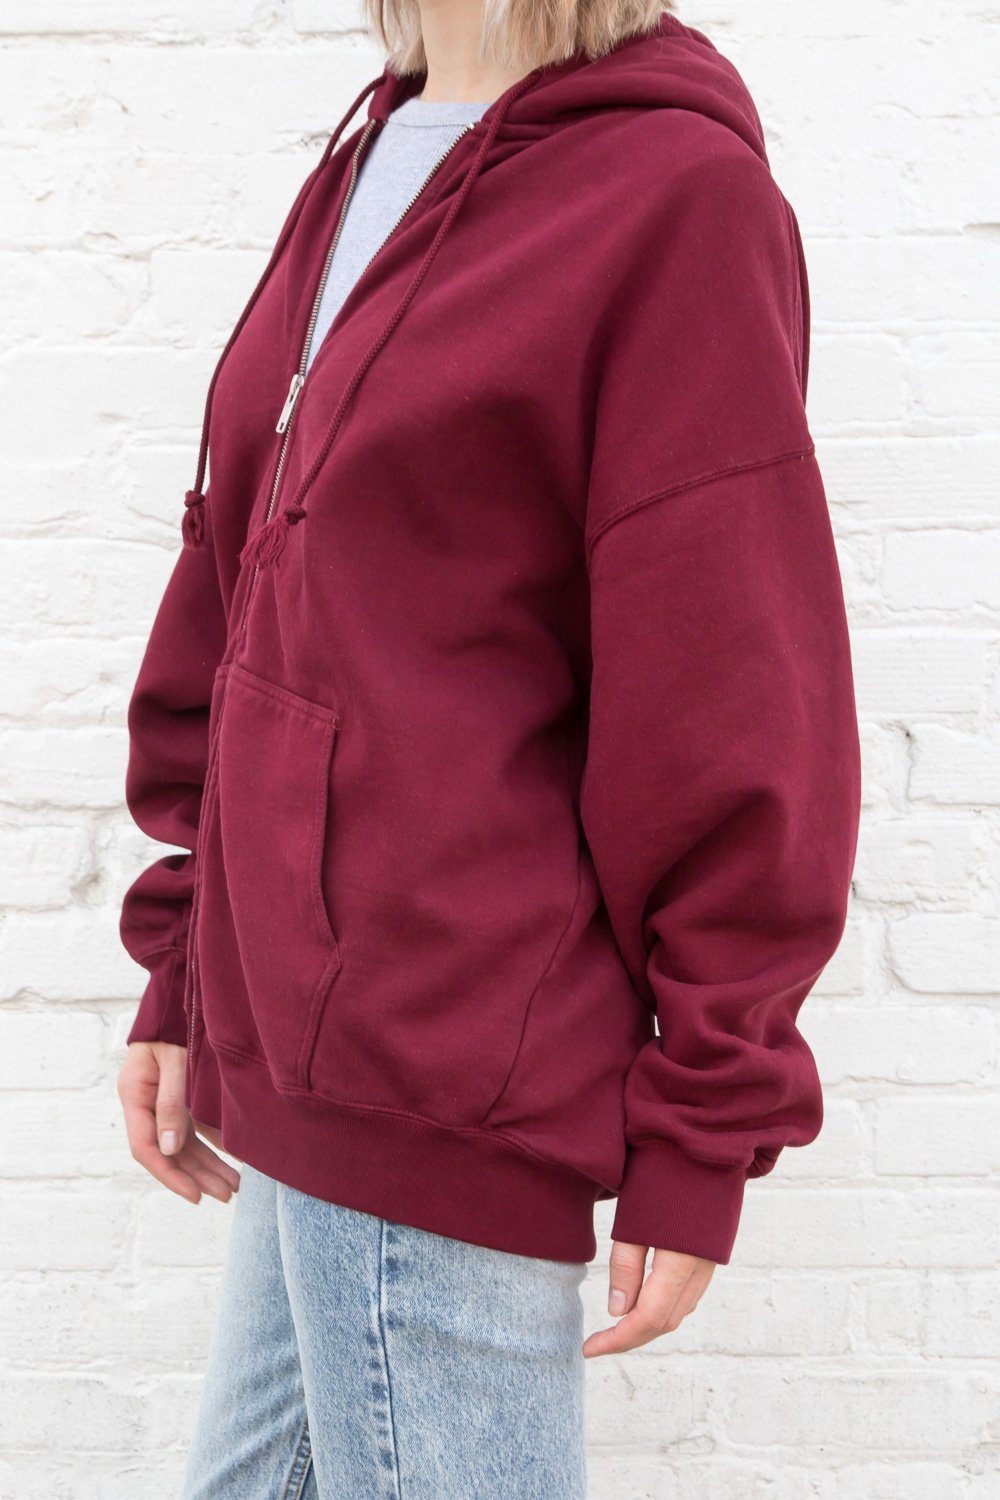 Brandy Melville Hoodie Red - $38 (15% Off Retail) - From H